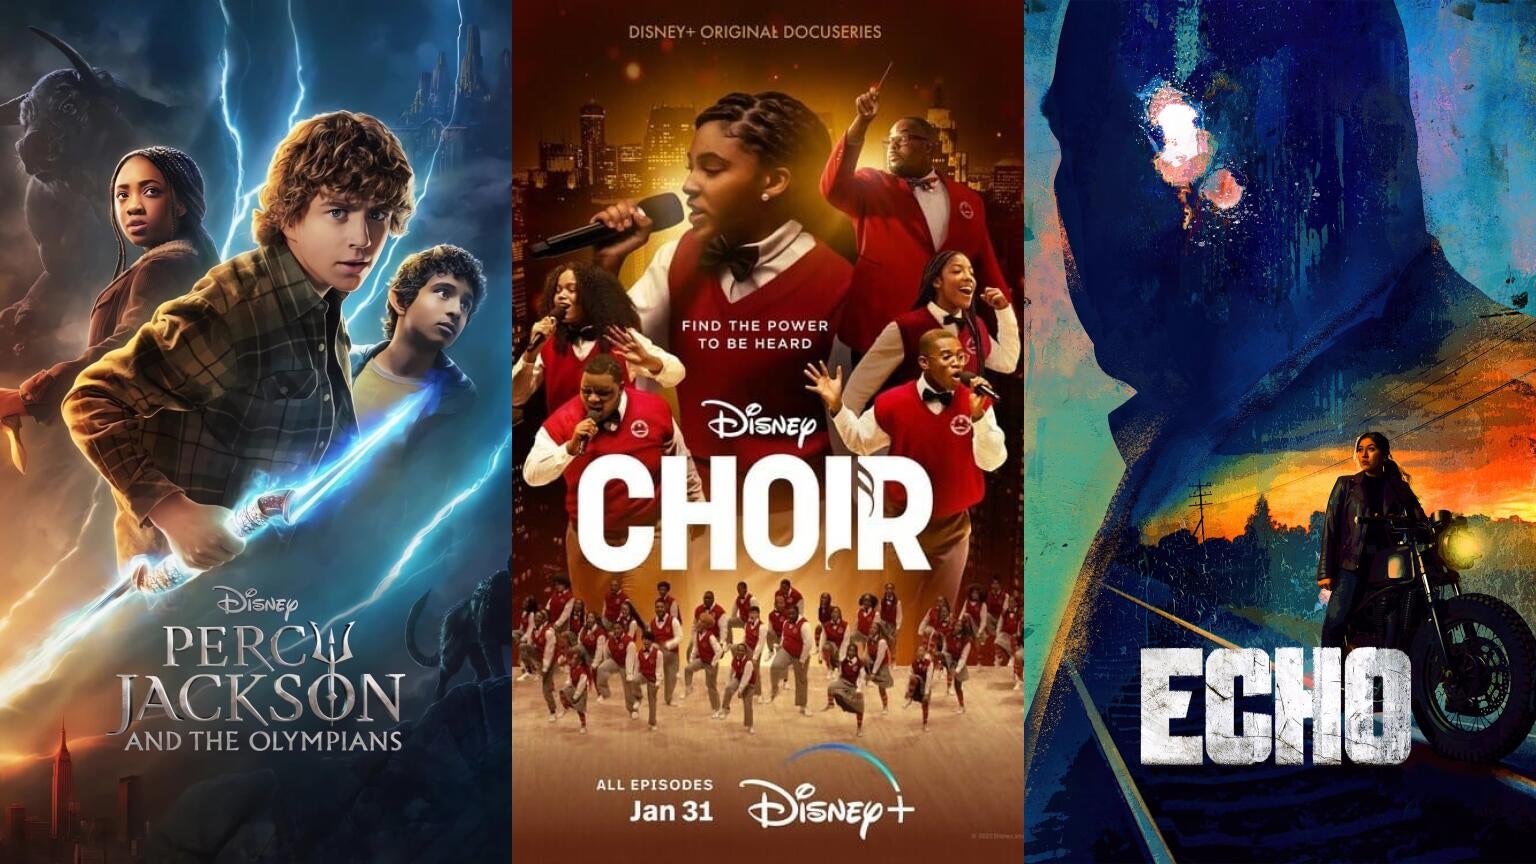 Posters for Disney+'s "Percy Jackson and the Olympians," "Choir," and "Echo"